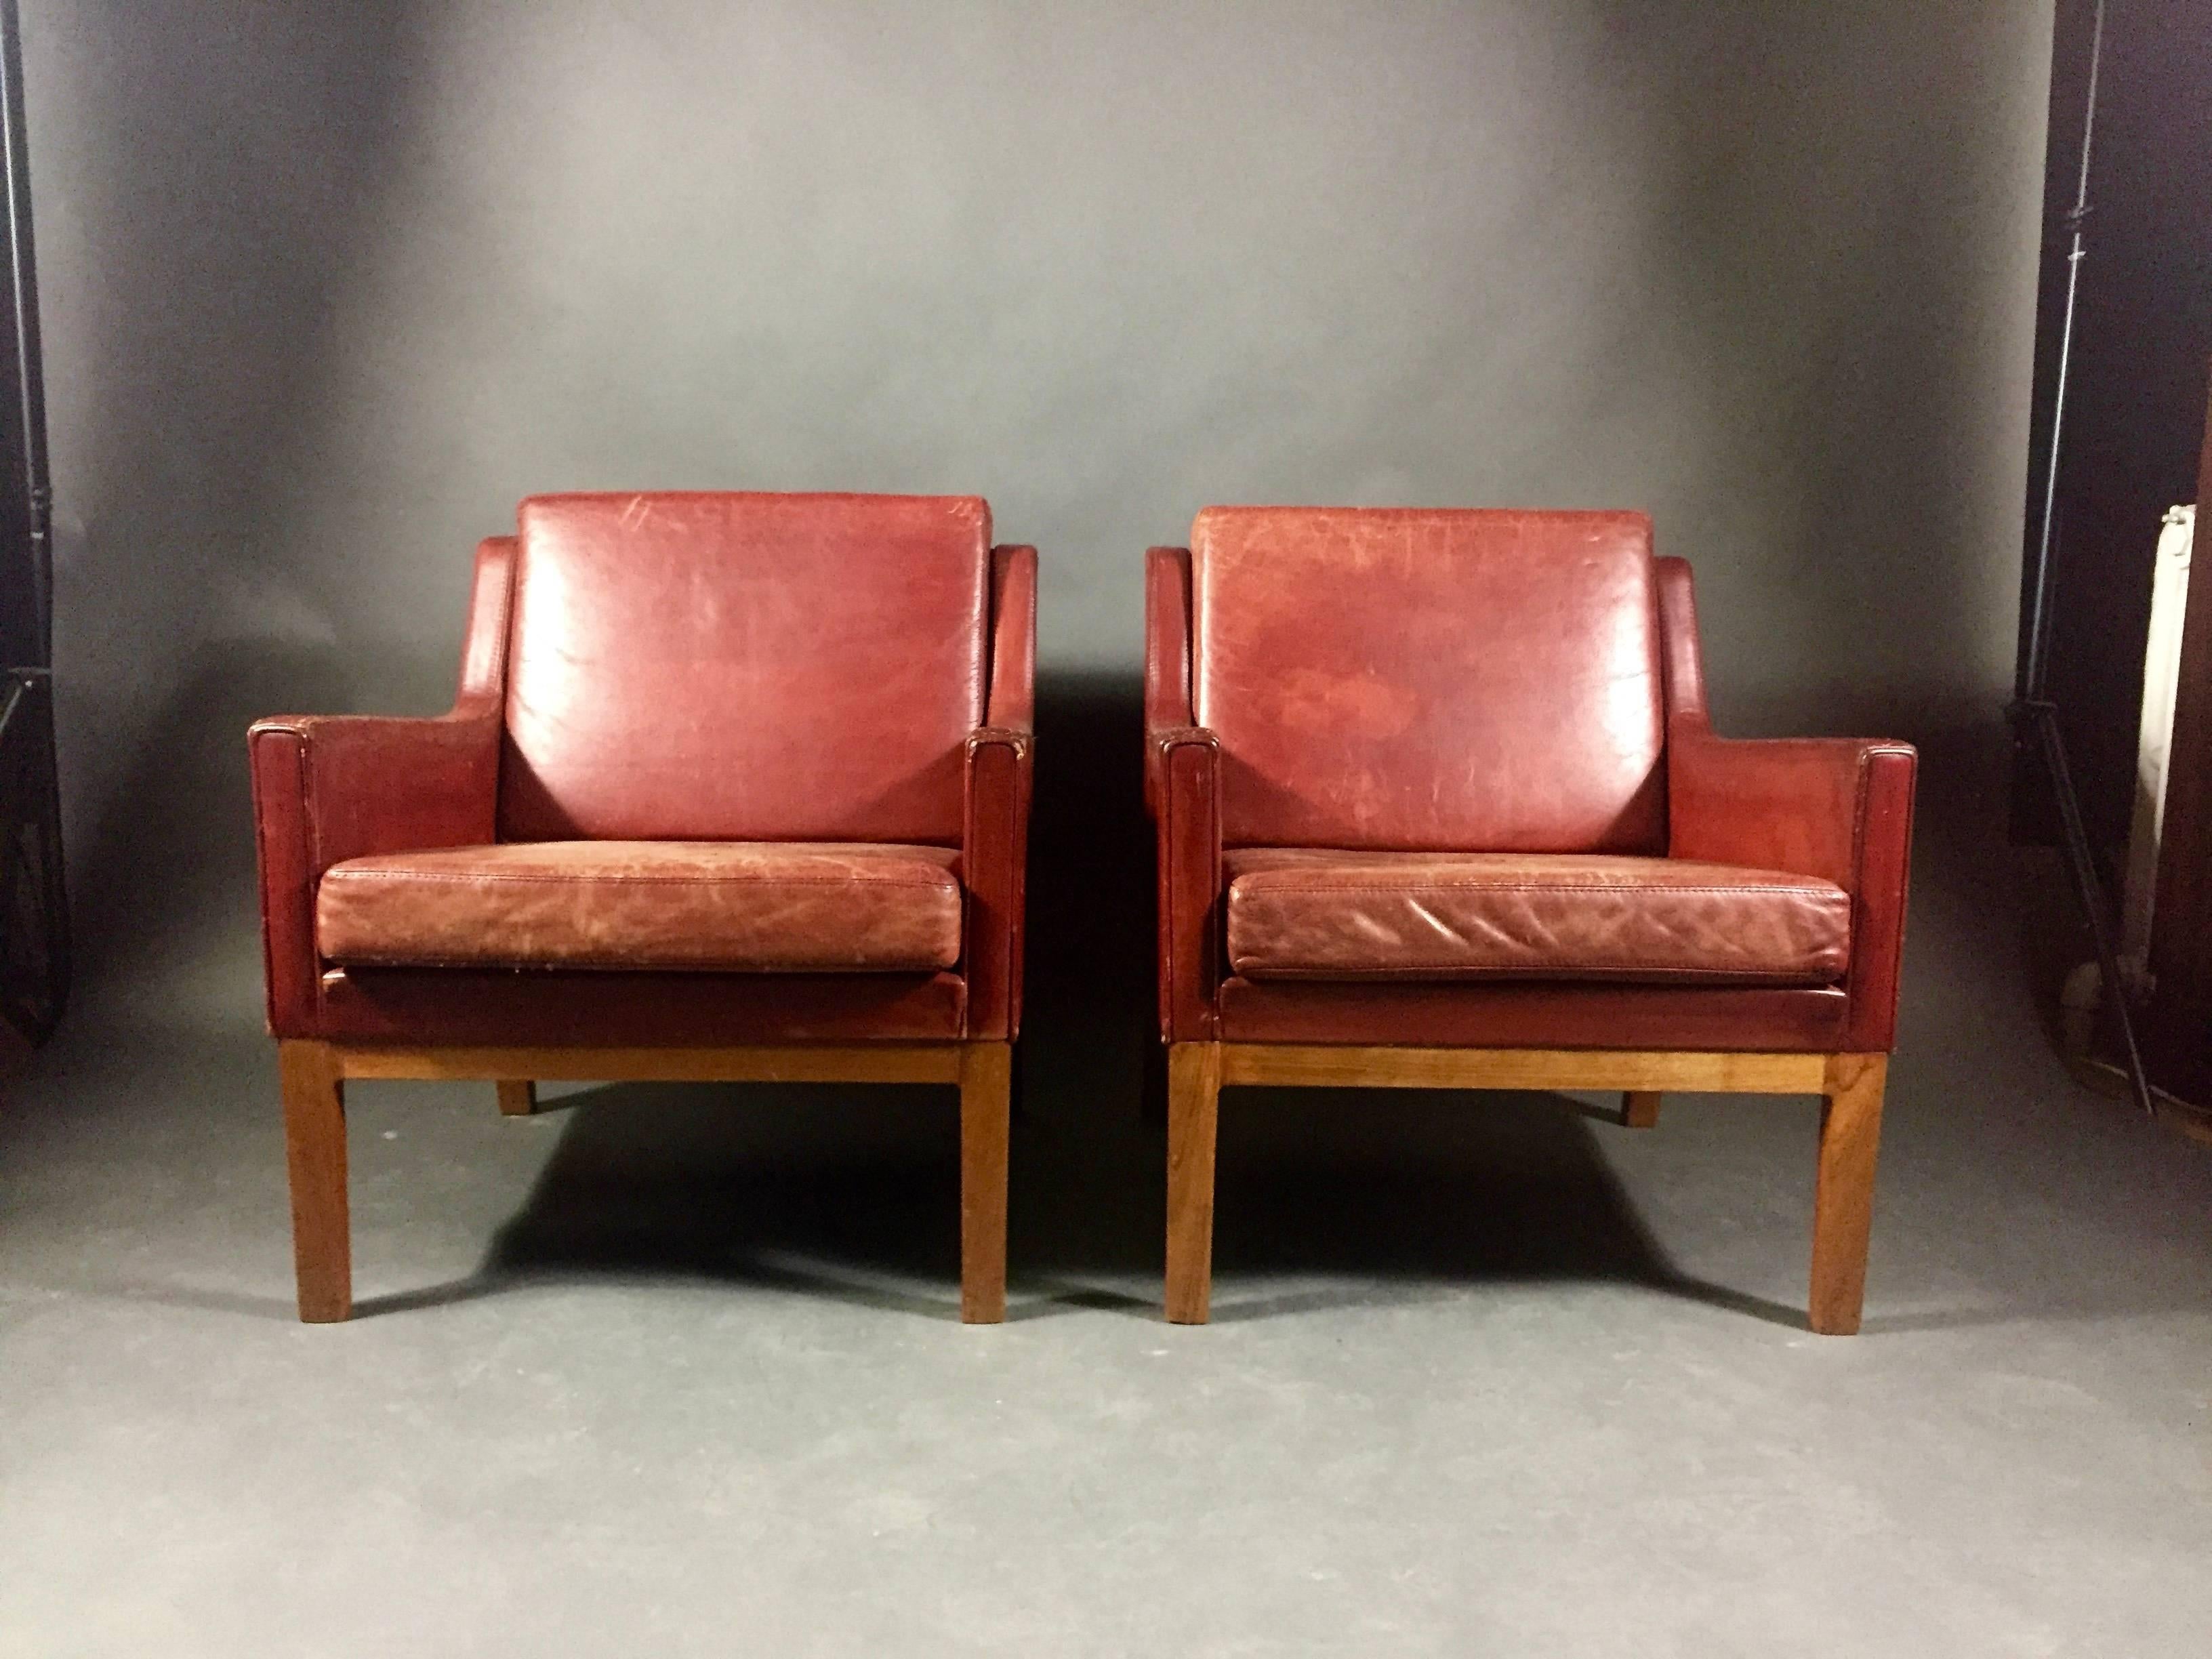 This is solid pair of Scandinavian red leather armchairs from 1960s, likely Danish with angled armrest over beech frame. Leather in good condition though overall scratches and later overdying evident in color - has beautiful vintage leather view.